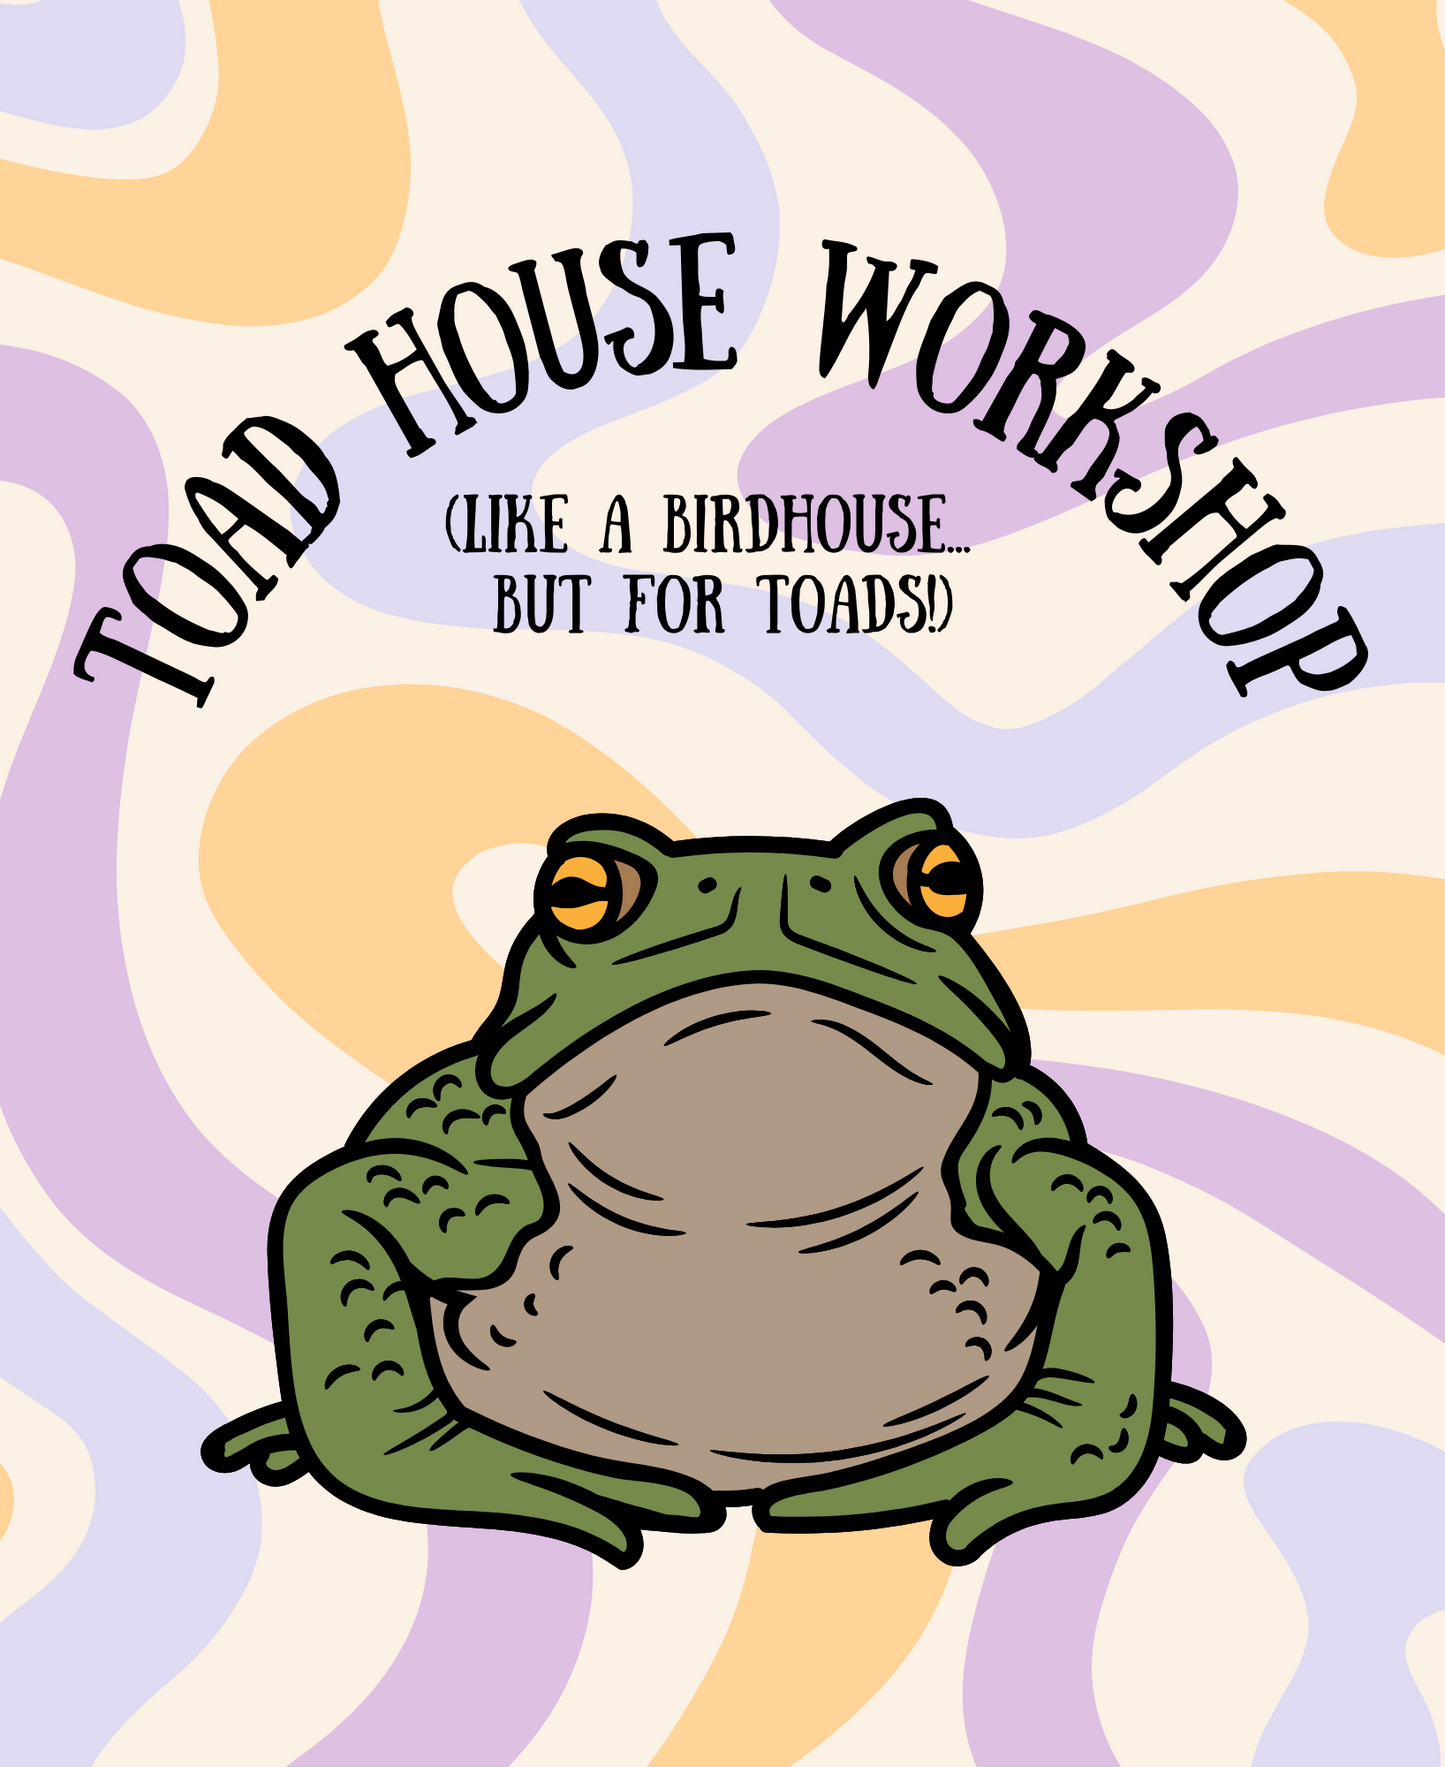 Toad House Workshop Tues. 6/25 - 5:30-7:30p